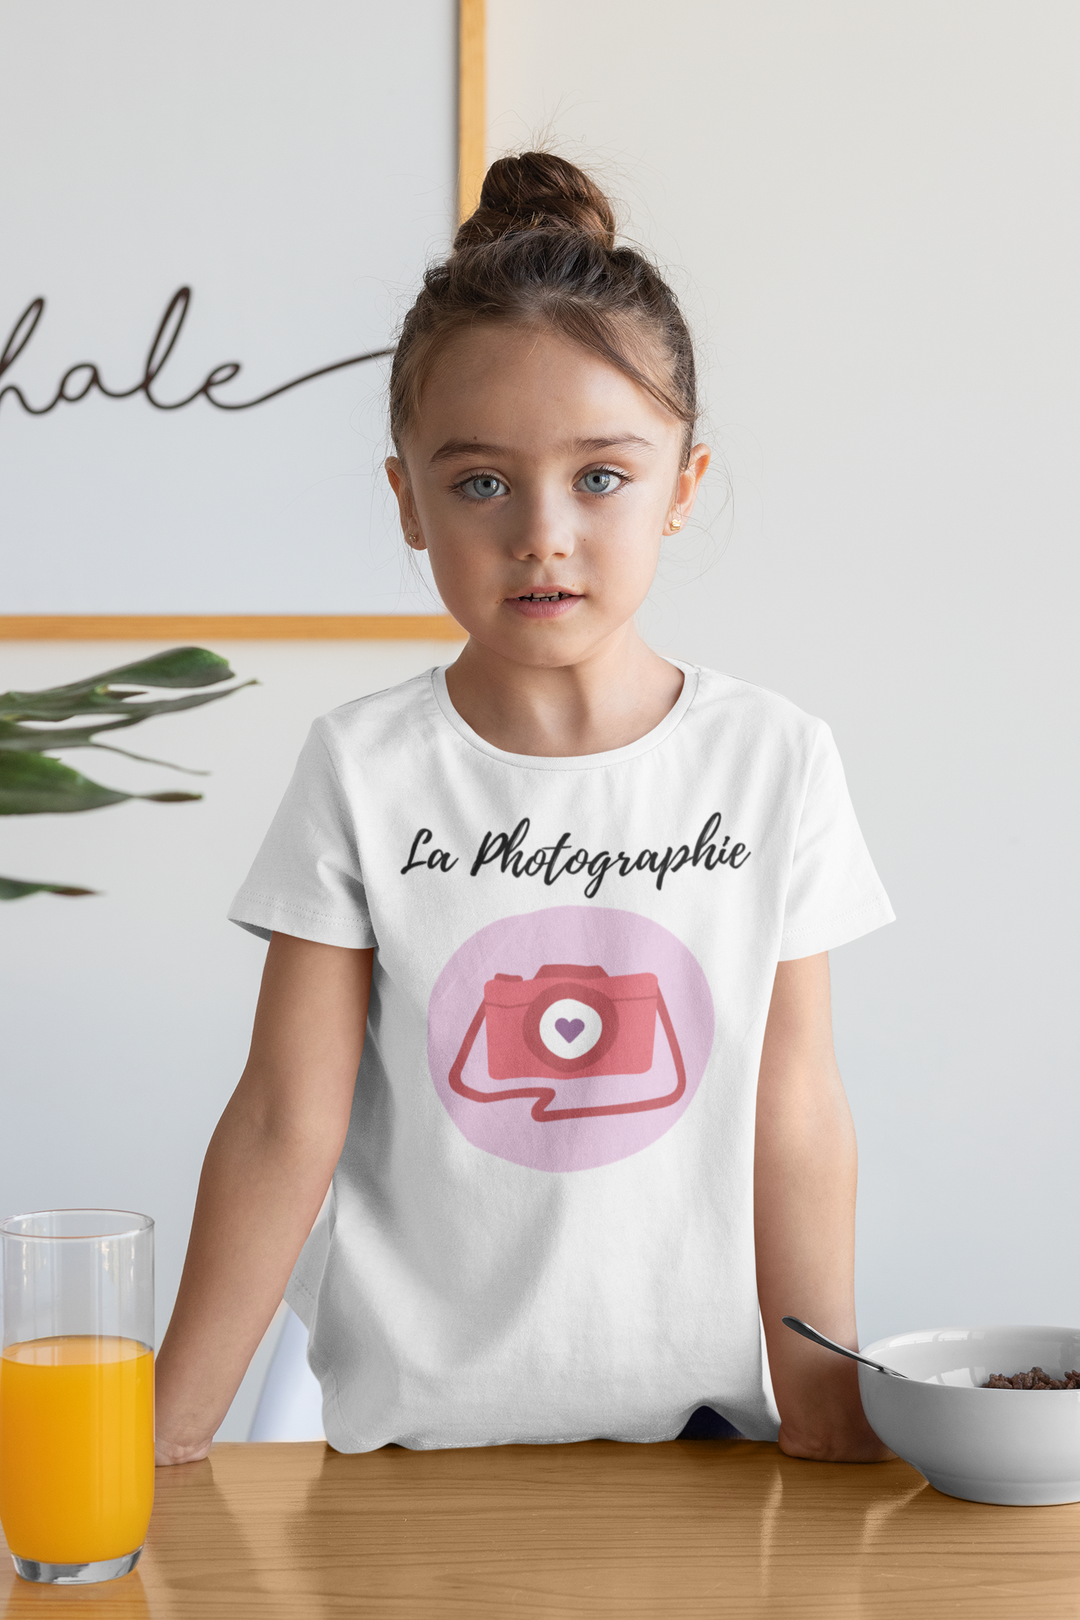 La Photographie. Short sleeve t shirt for toddler and kids. - TeesForToddlersandKids -  t-shirt - seasons, summer - la-photographie-short-sleeve-t-shirt-for-toddler-and-kids